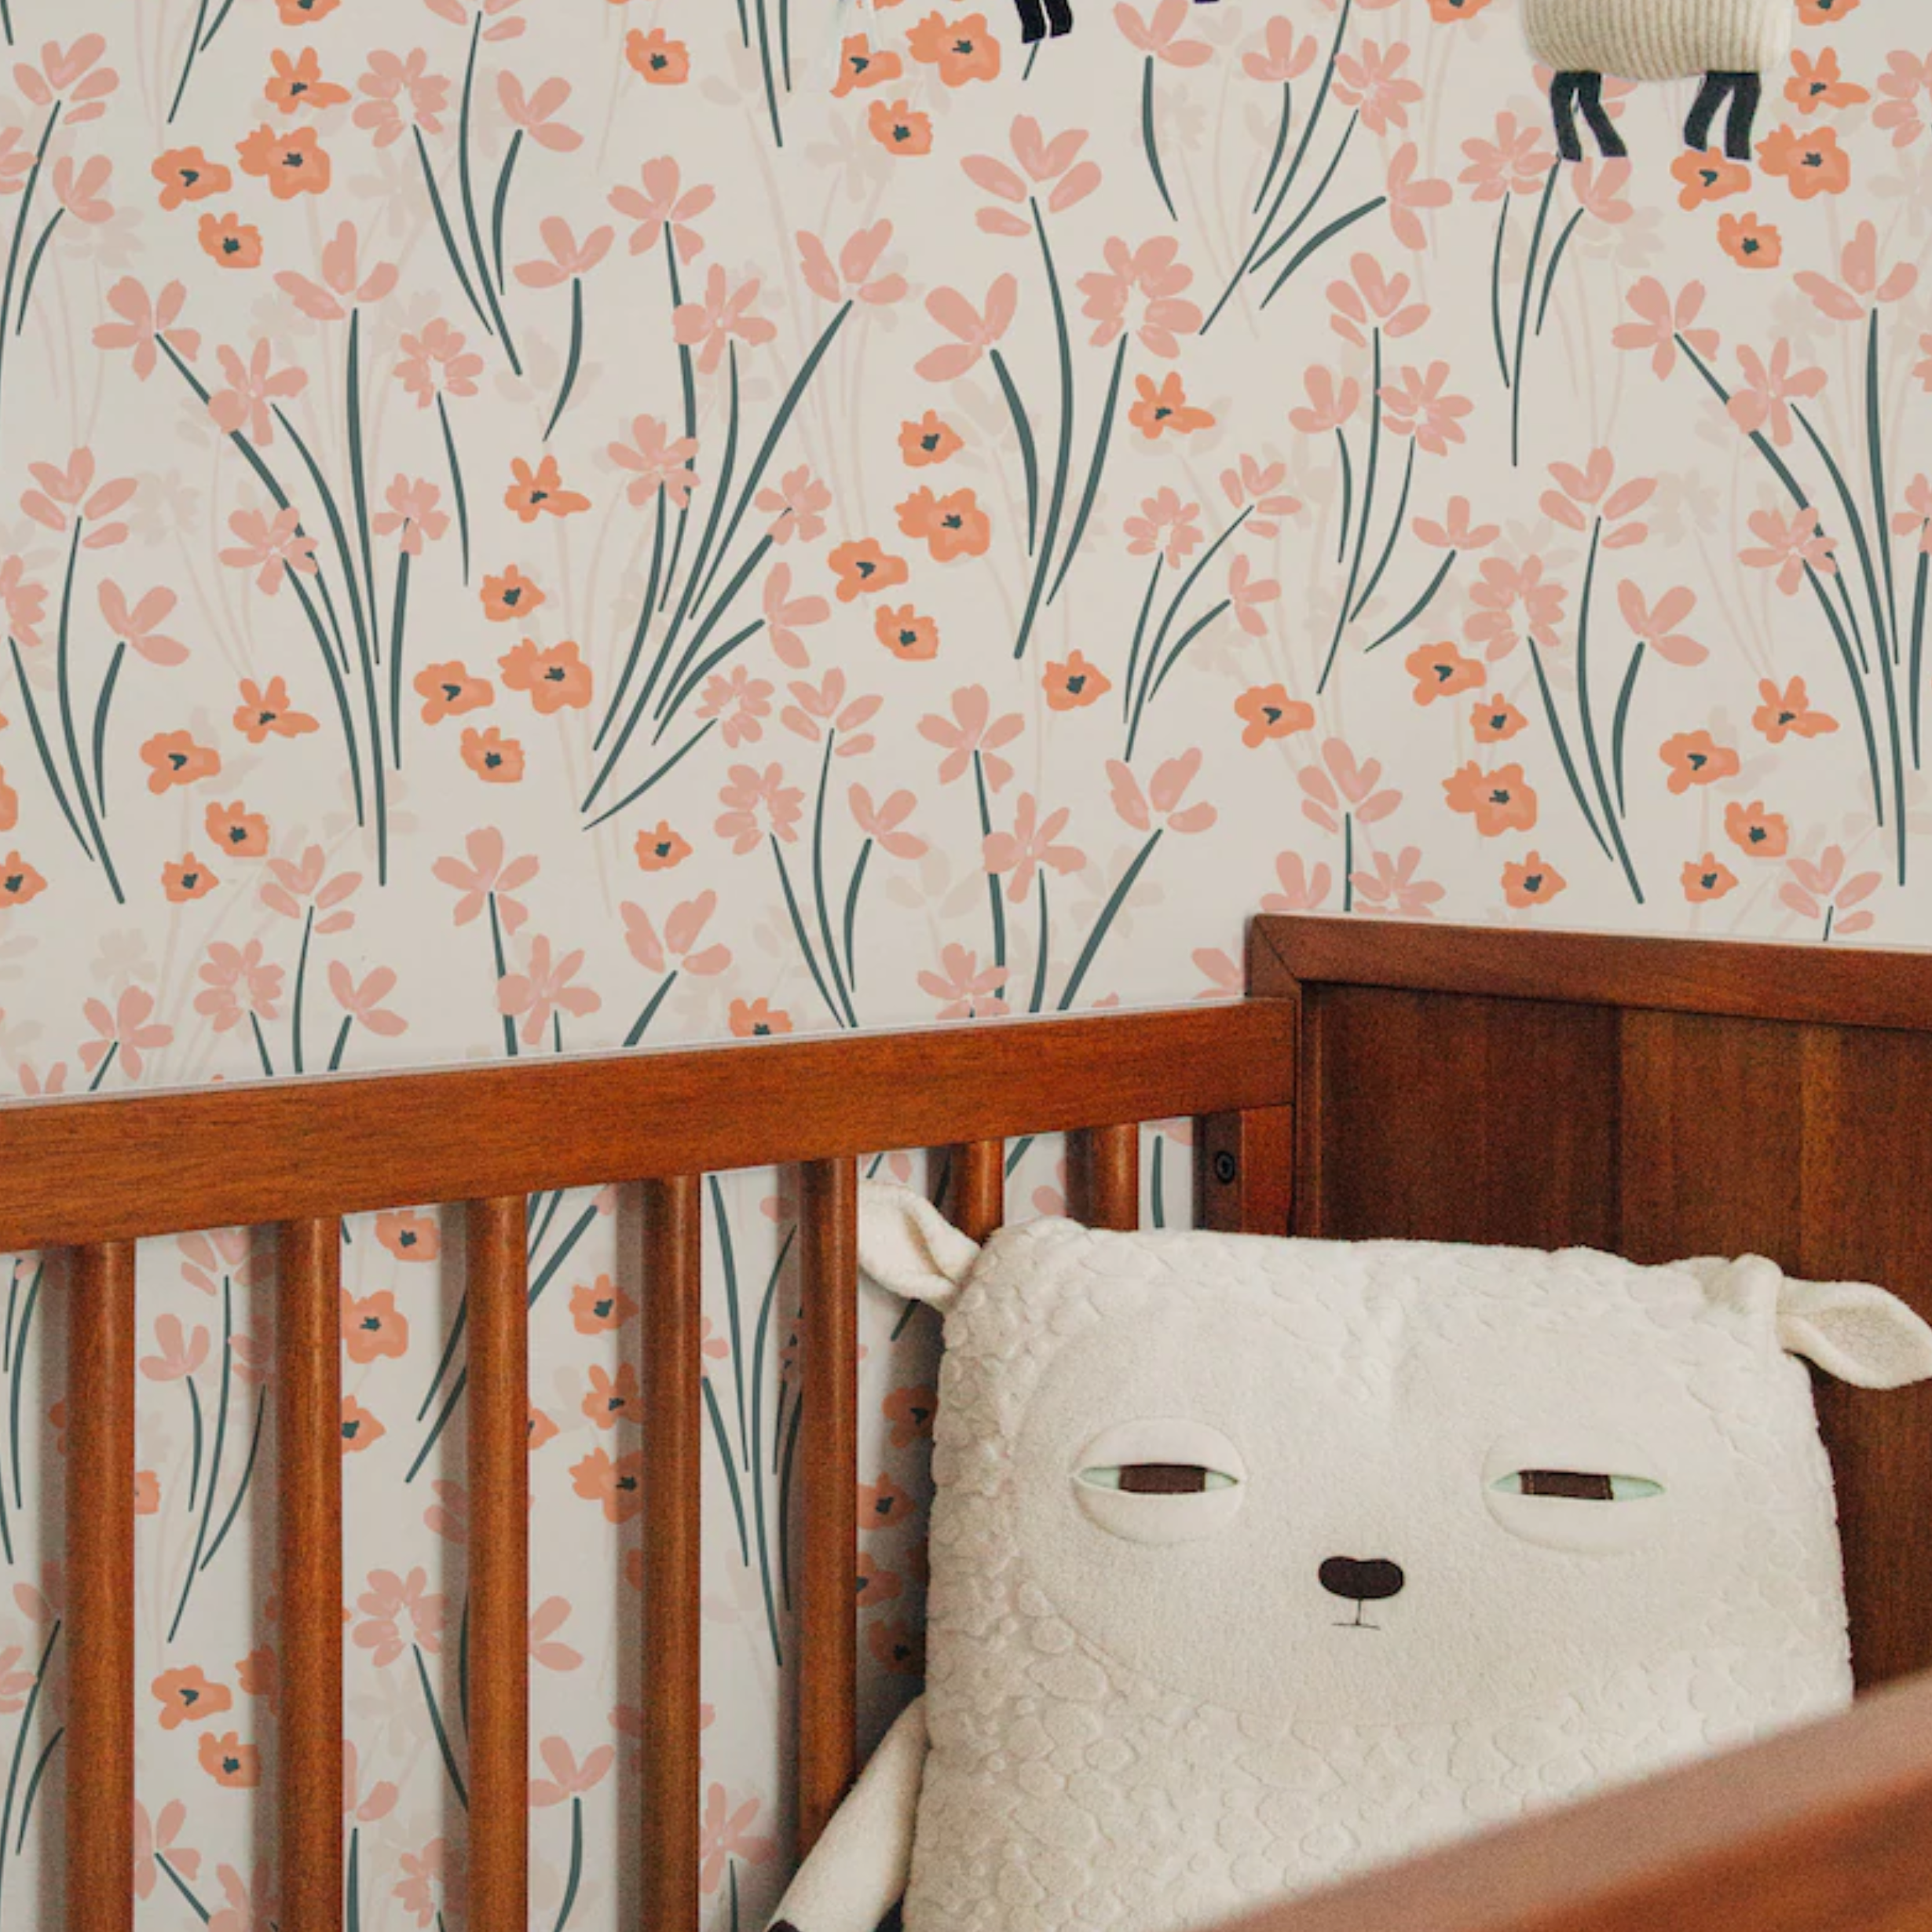 The wallpaper with a whimsical flower pattern is applied in a nursery room, adorning the wall behind a wooden crib. A plush sheep toy peeks out from the crib, complementing the gentle and nurturing ambiance of the room.